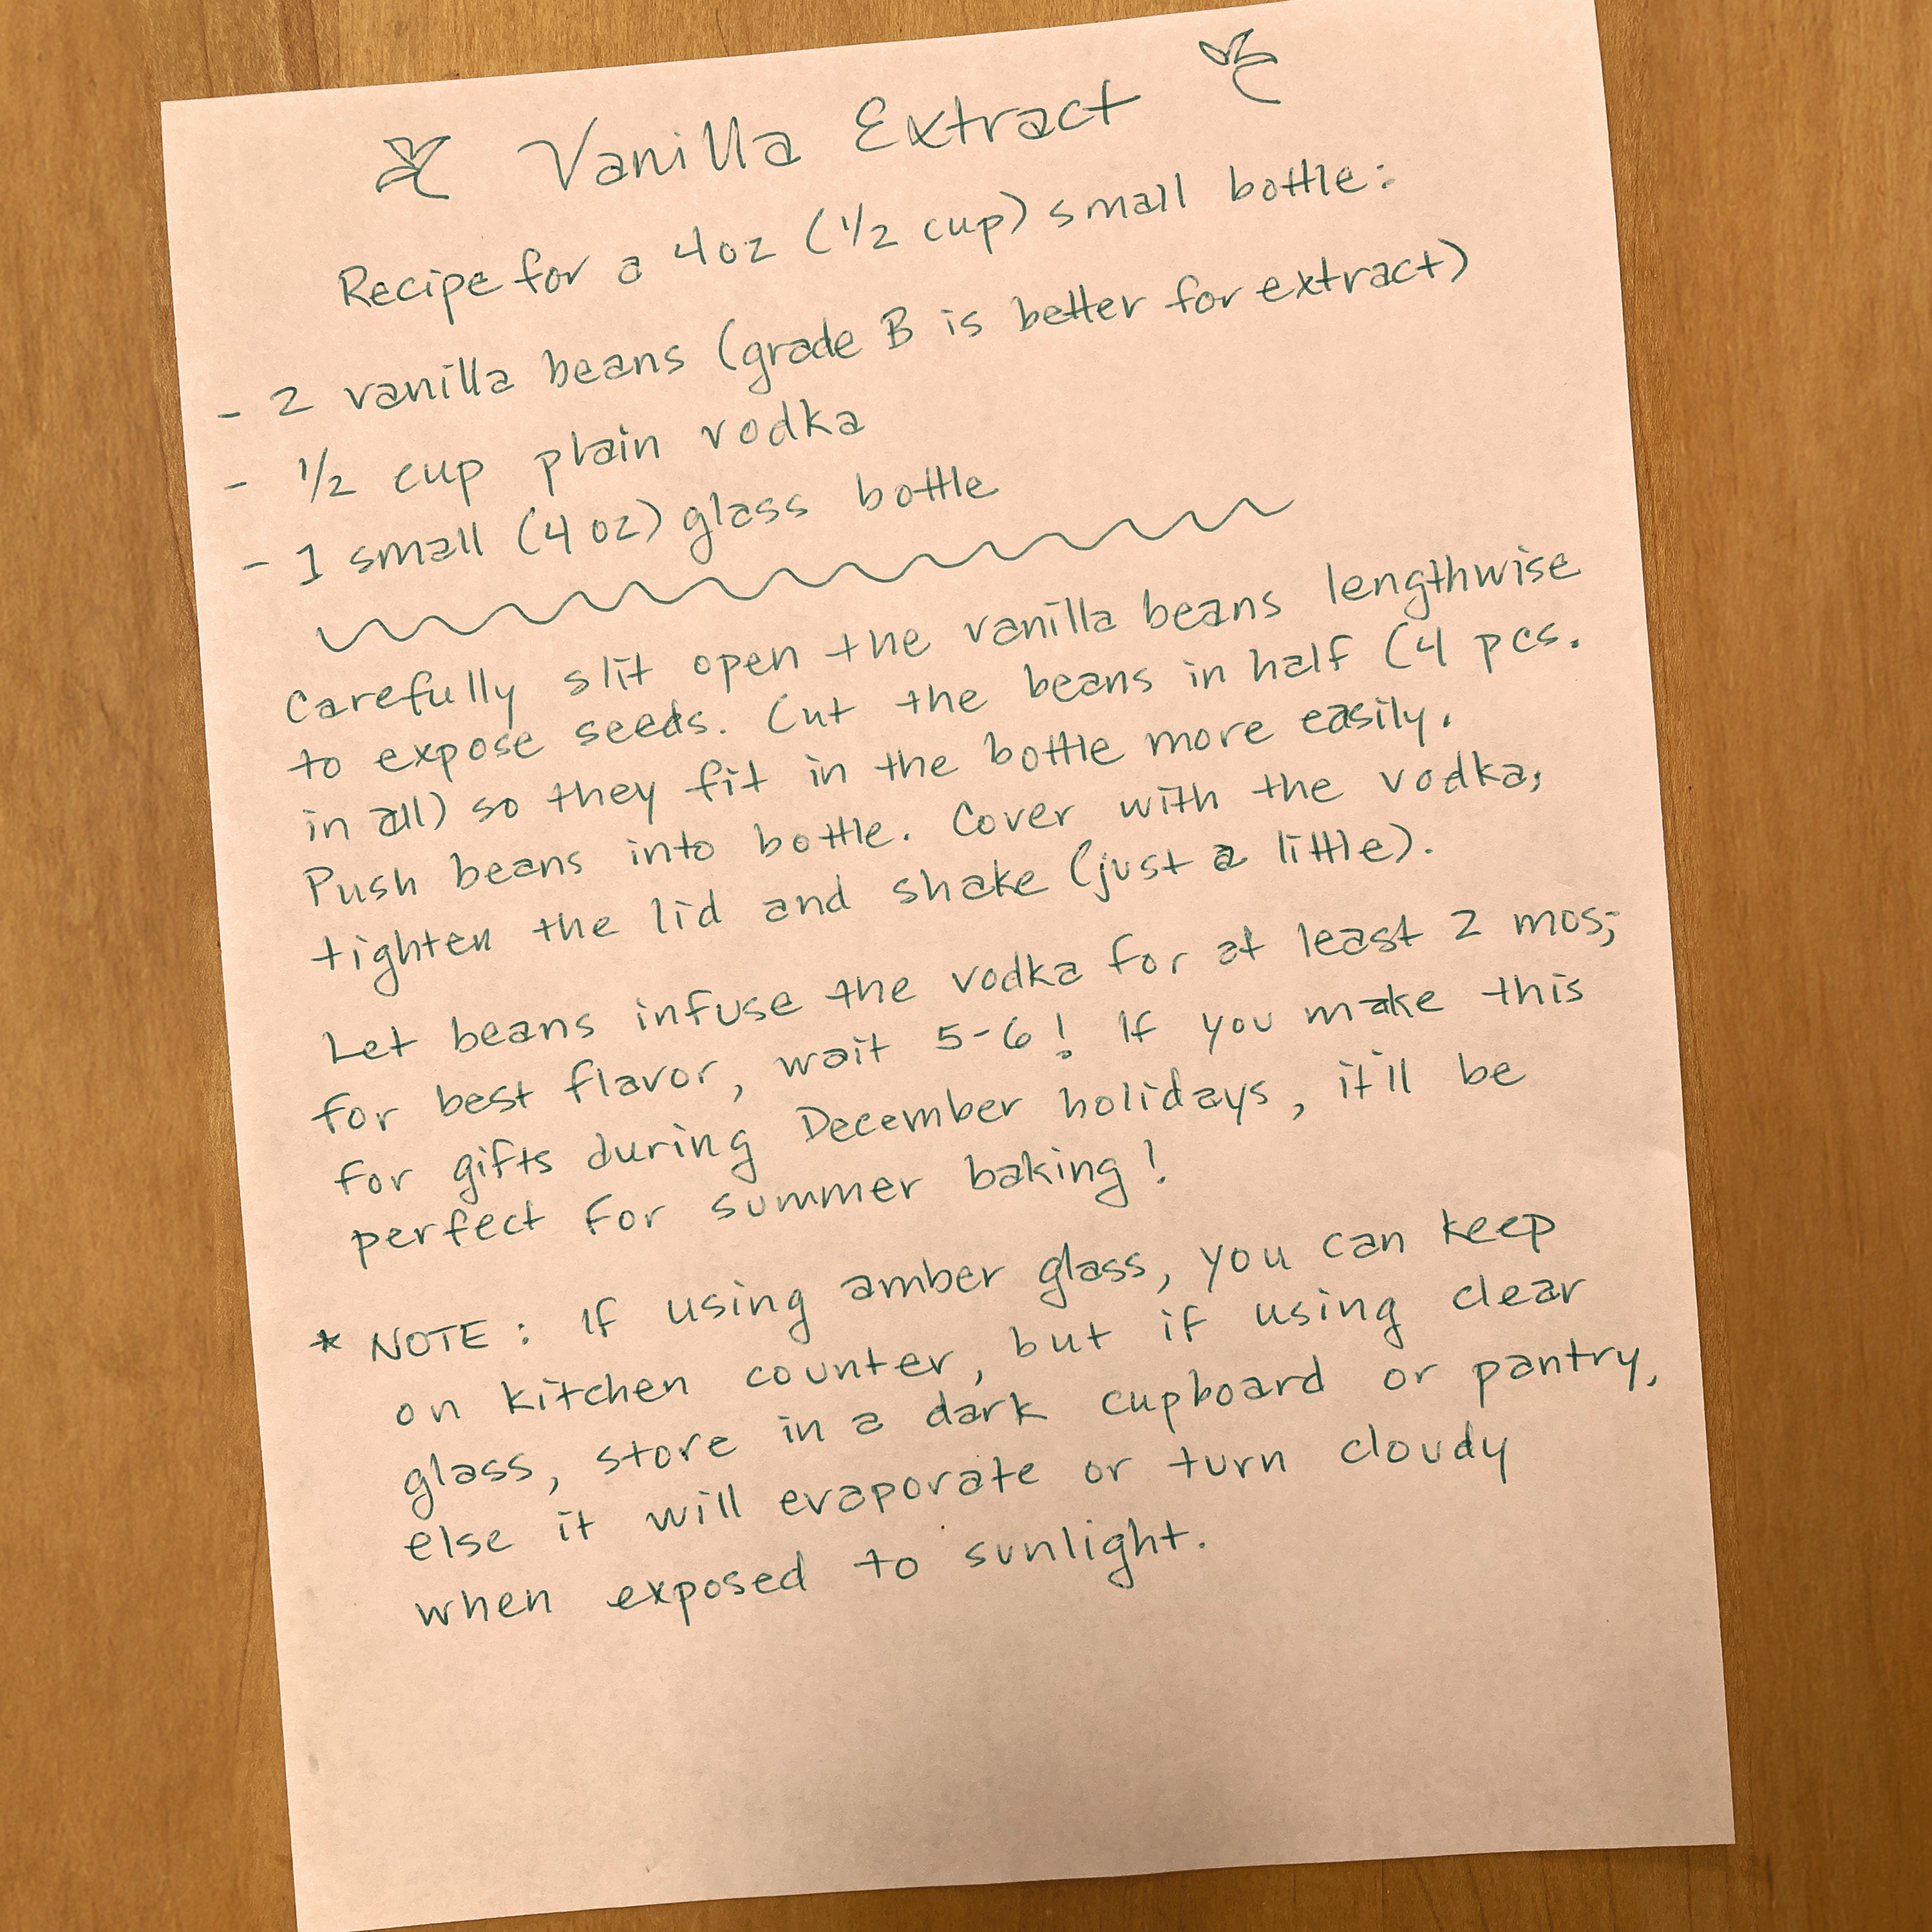 A recipe for vanilla extract. The full text can be found at the bottom of this article.